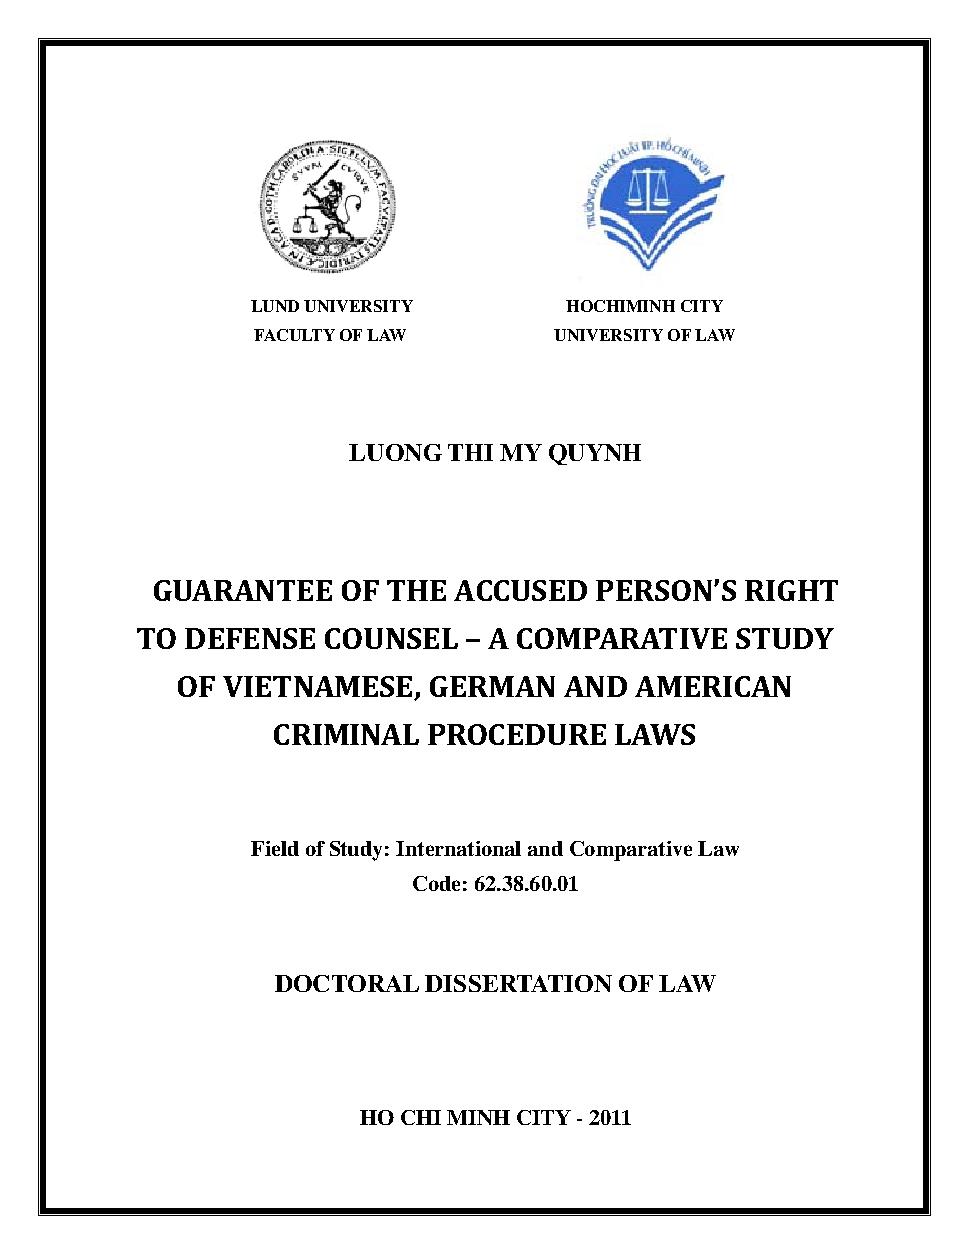 Guarantee of the accused person's right todefense counsel - A comparative study of Voetnamese, German and American criminal procedure laws